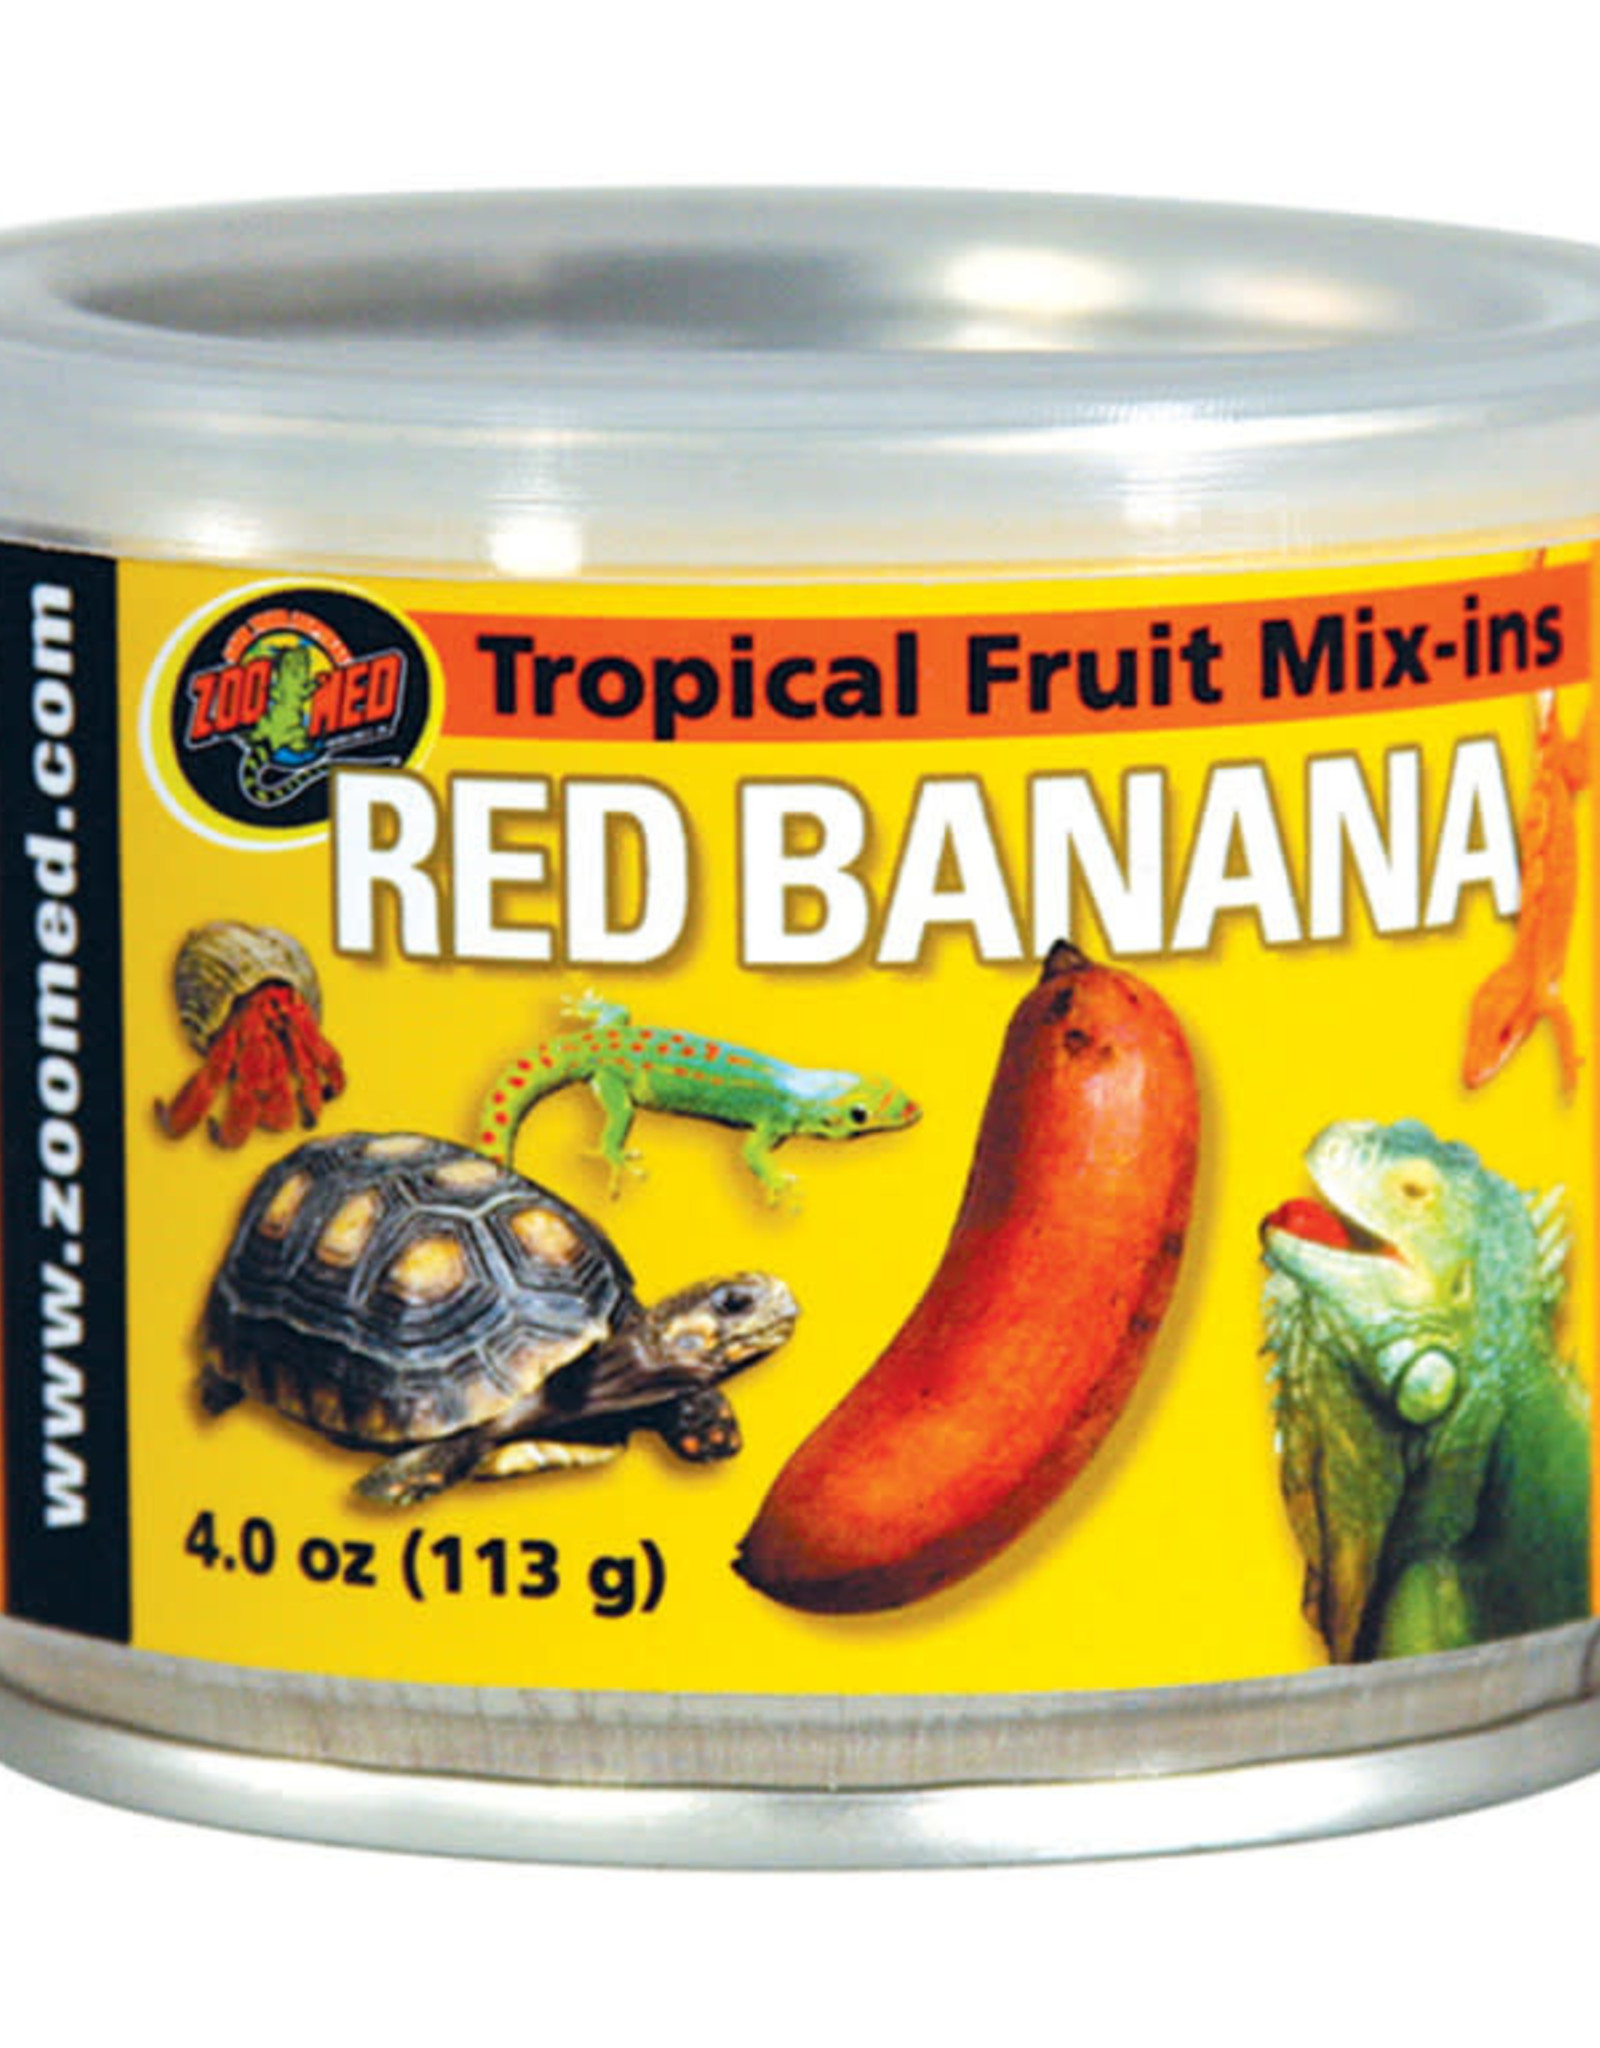 ZOO MED LABORATORIES, INC. ZOO MED ZM-152- CANNED FOOD- TROPICAL FRUIT MIX-INS- RED BANANA- 4 OZ